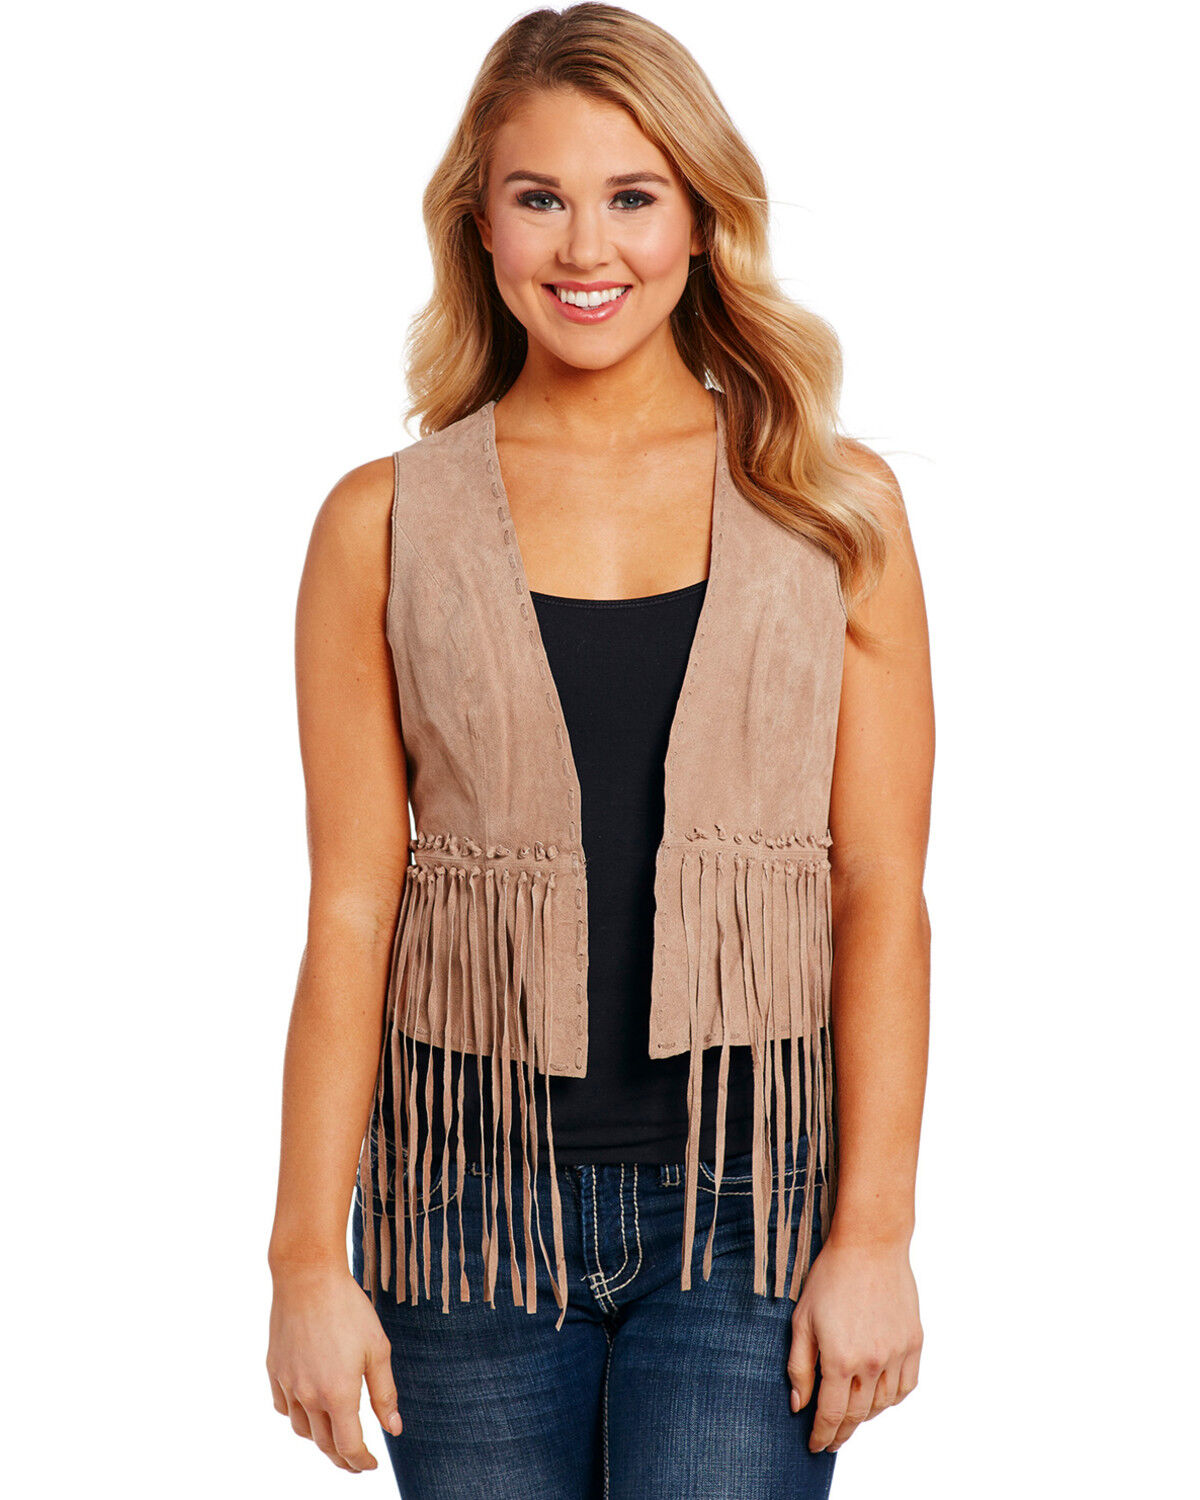 Ll25561-23 Cripple Creek Womens Mocha Hand-Laced and Fringed Leather Vest